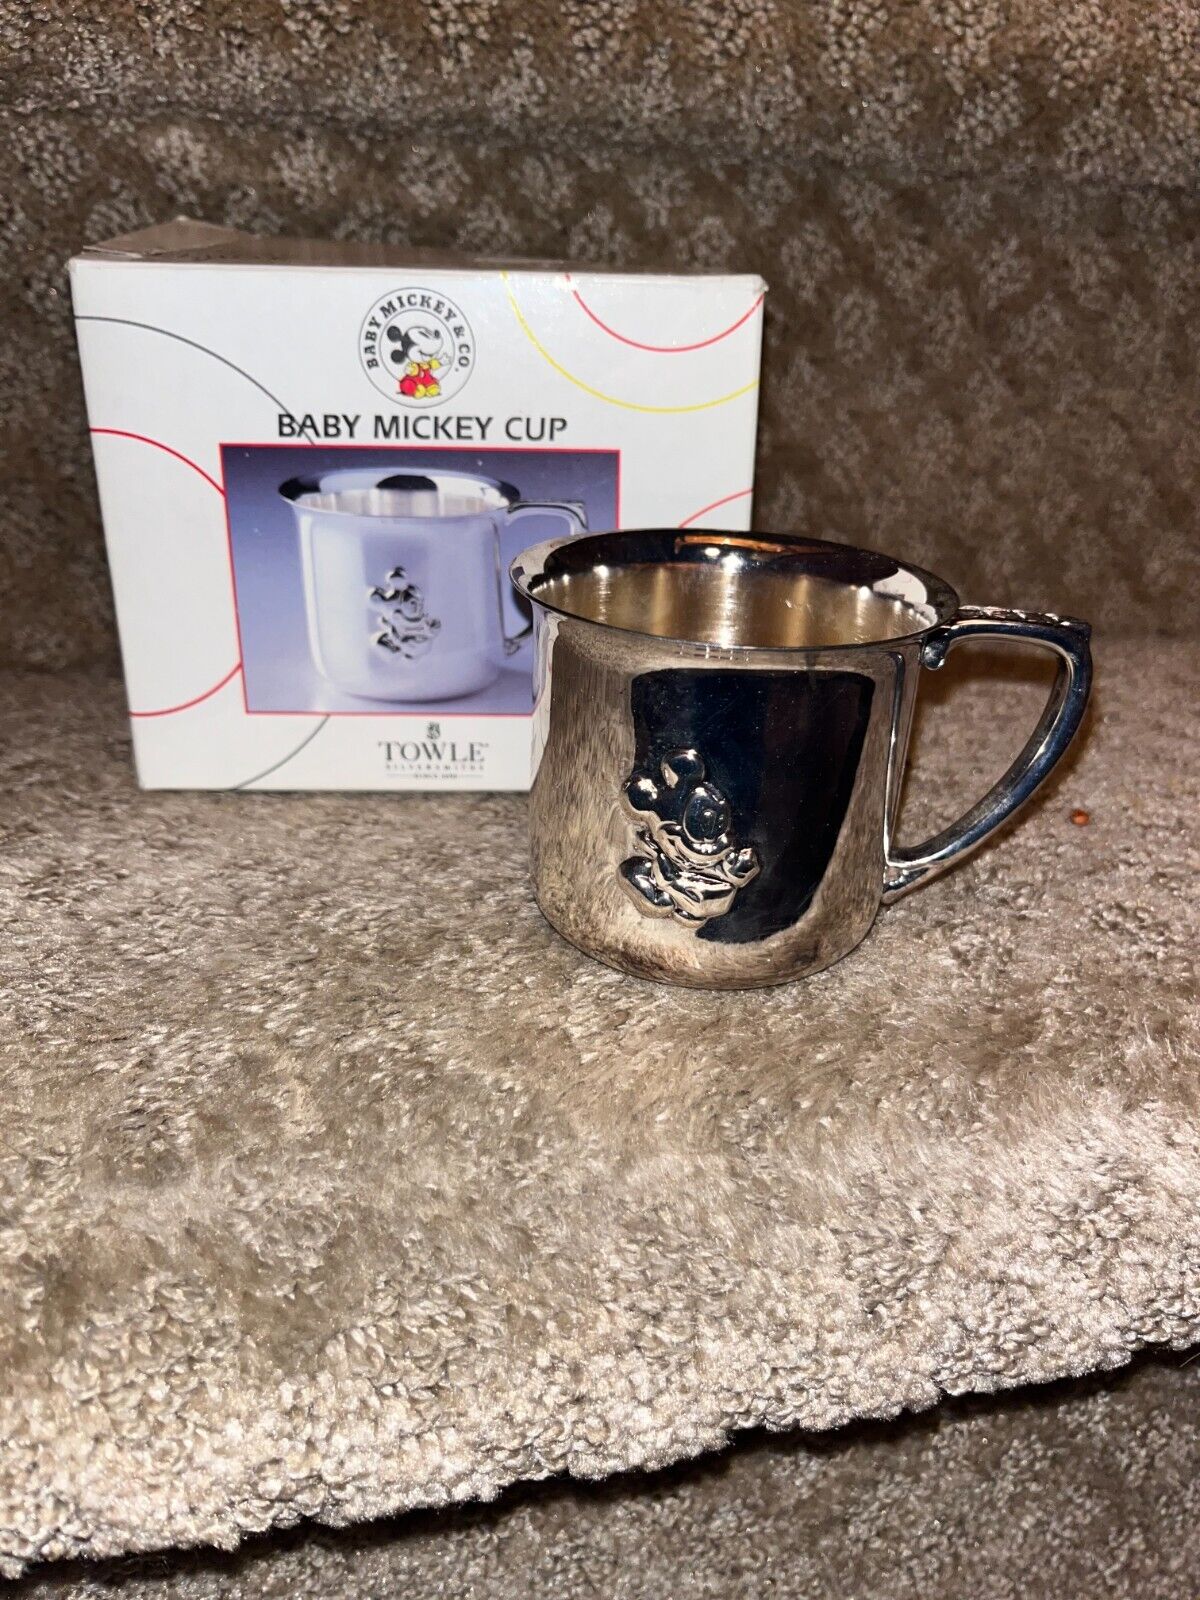 Baby Mickey Cup by Towle Silver Plated New Open Box